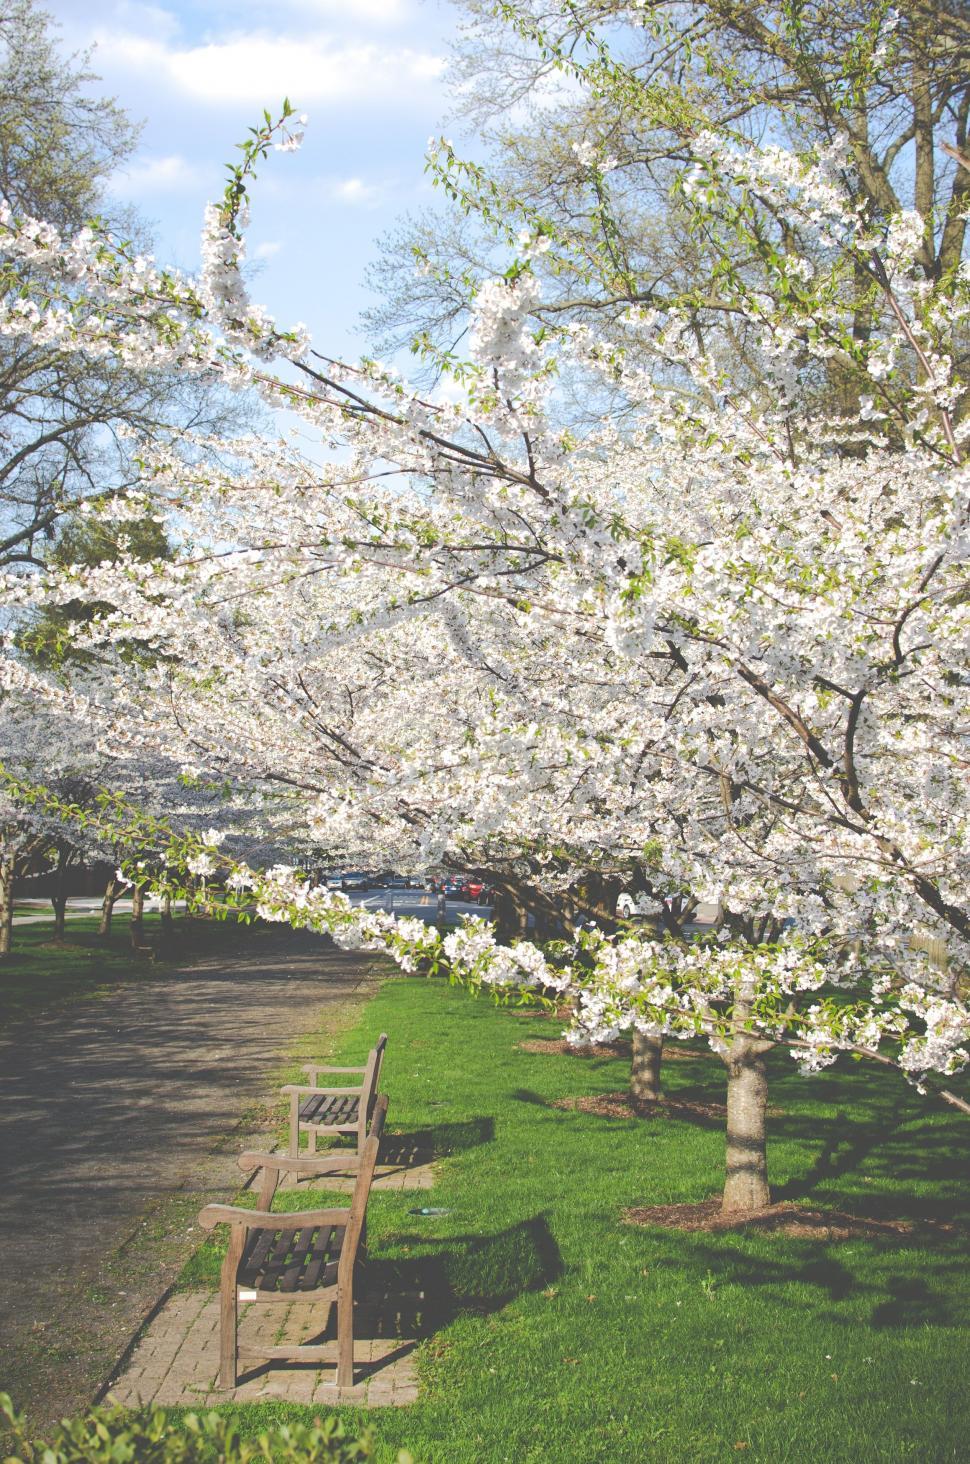 Free Image of Row of Benches Under Tree With White Flowers 